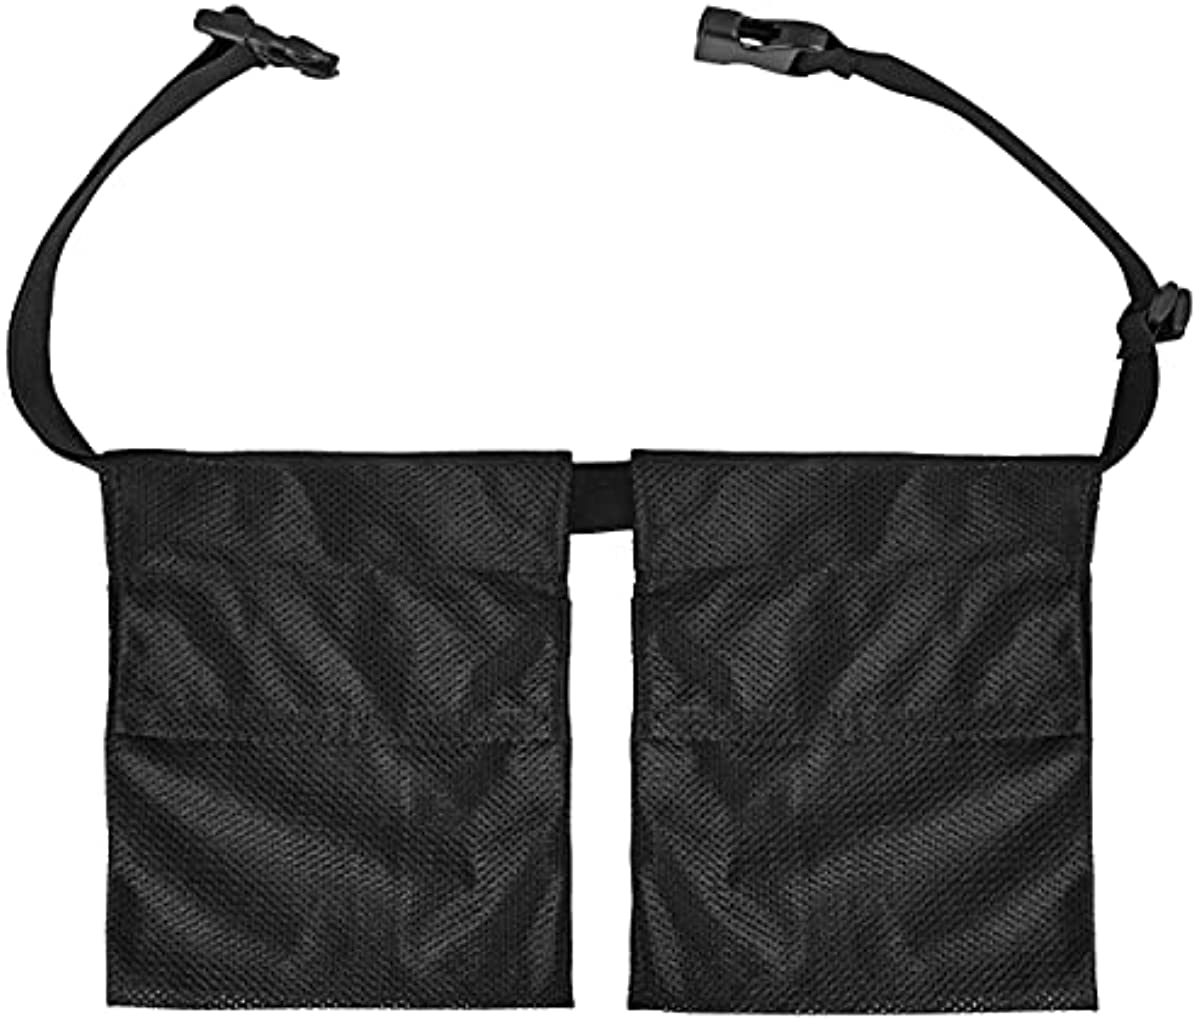 Post Surgical Drain Belt with Pockets - Medical Supplies for Mastectomy or Breast Augmentation Recovery, Adjustable Belt, Holds 4 Drain Bulbs, Machine Washable